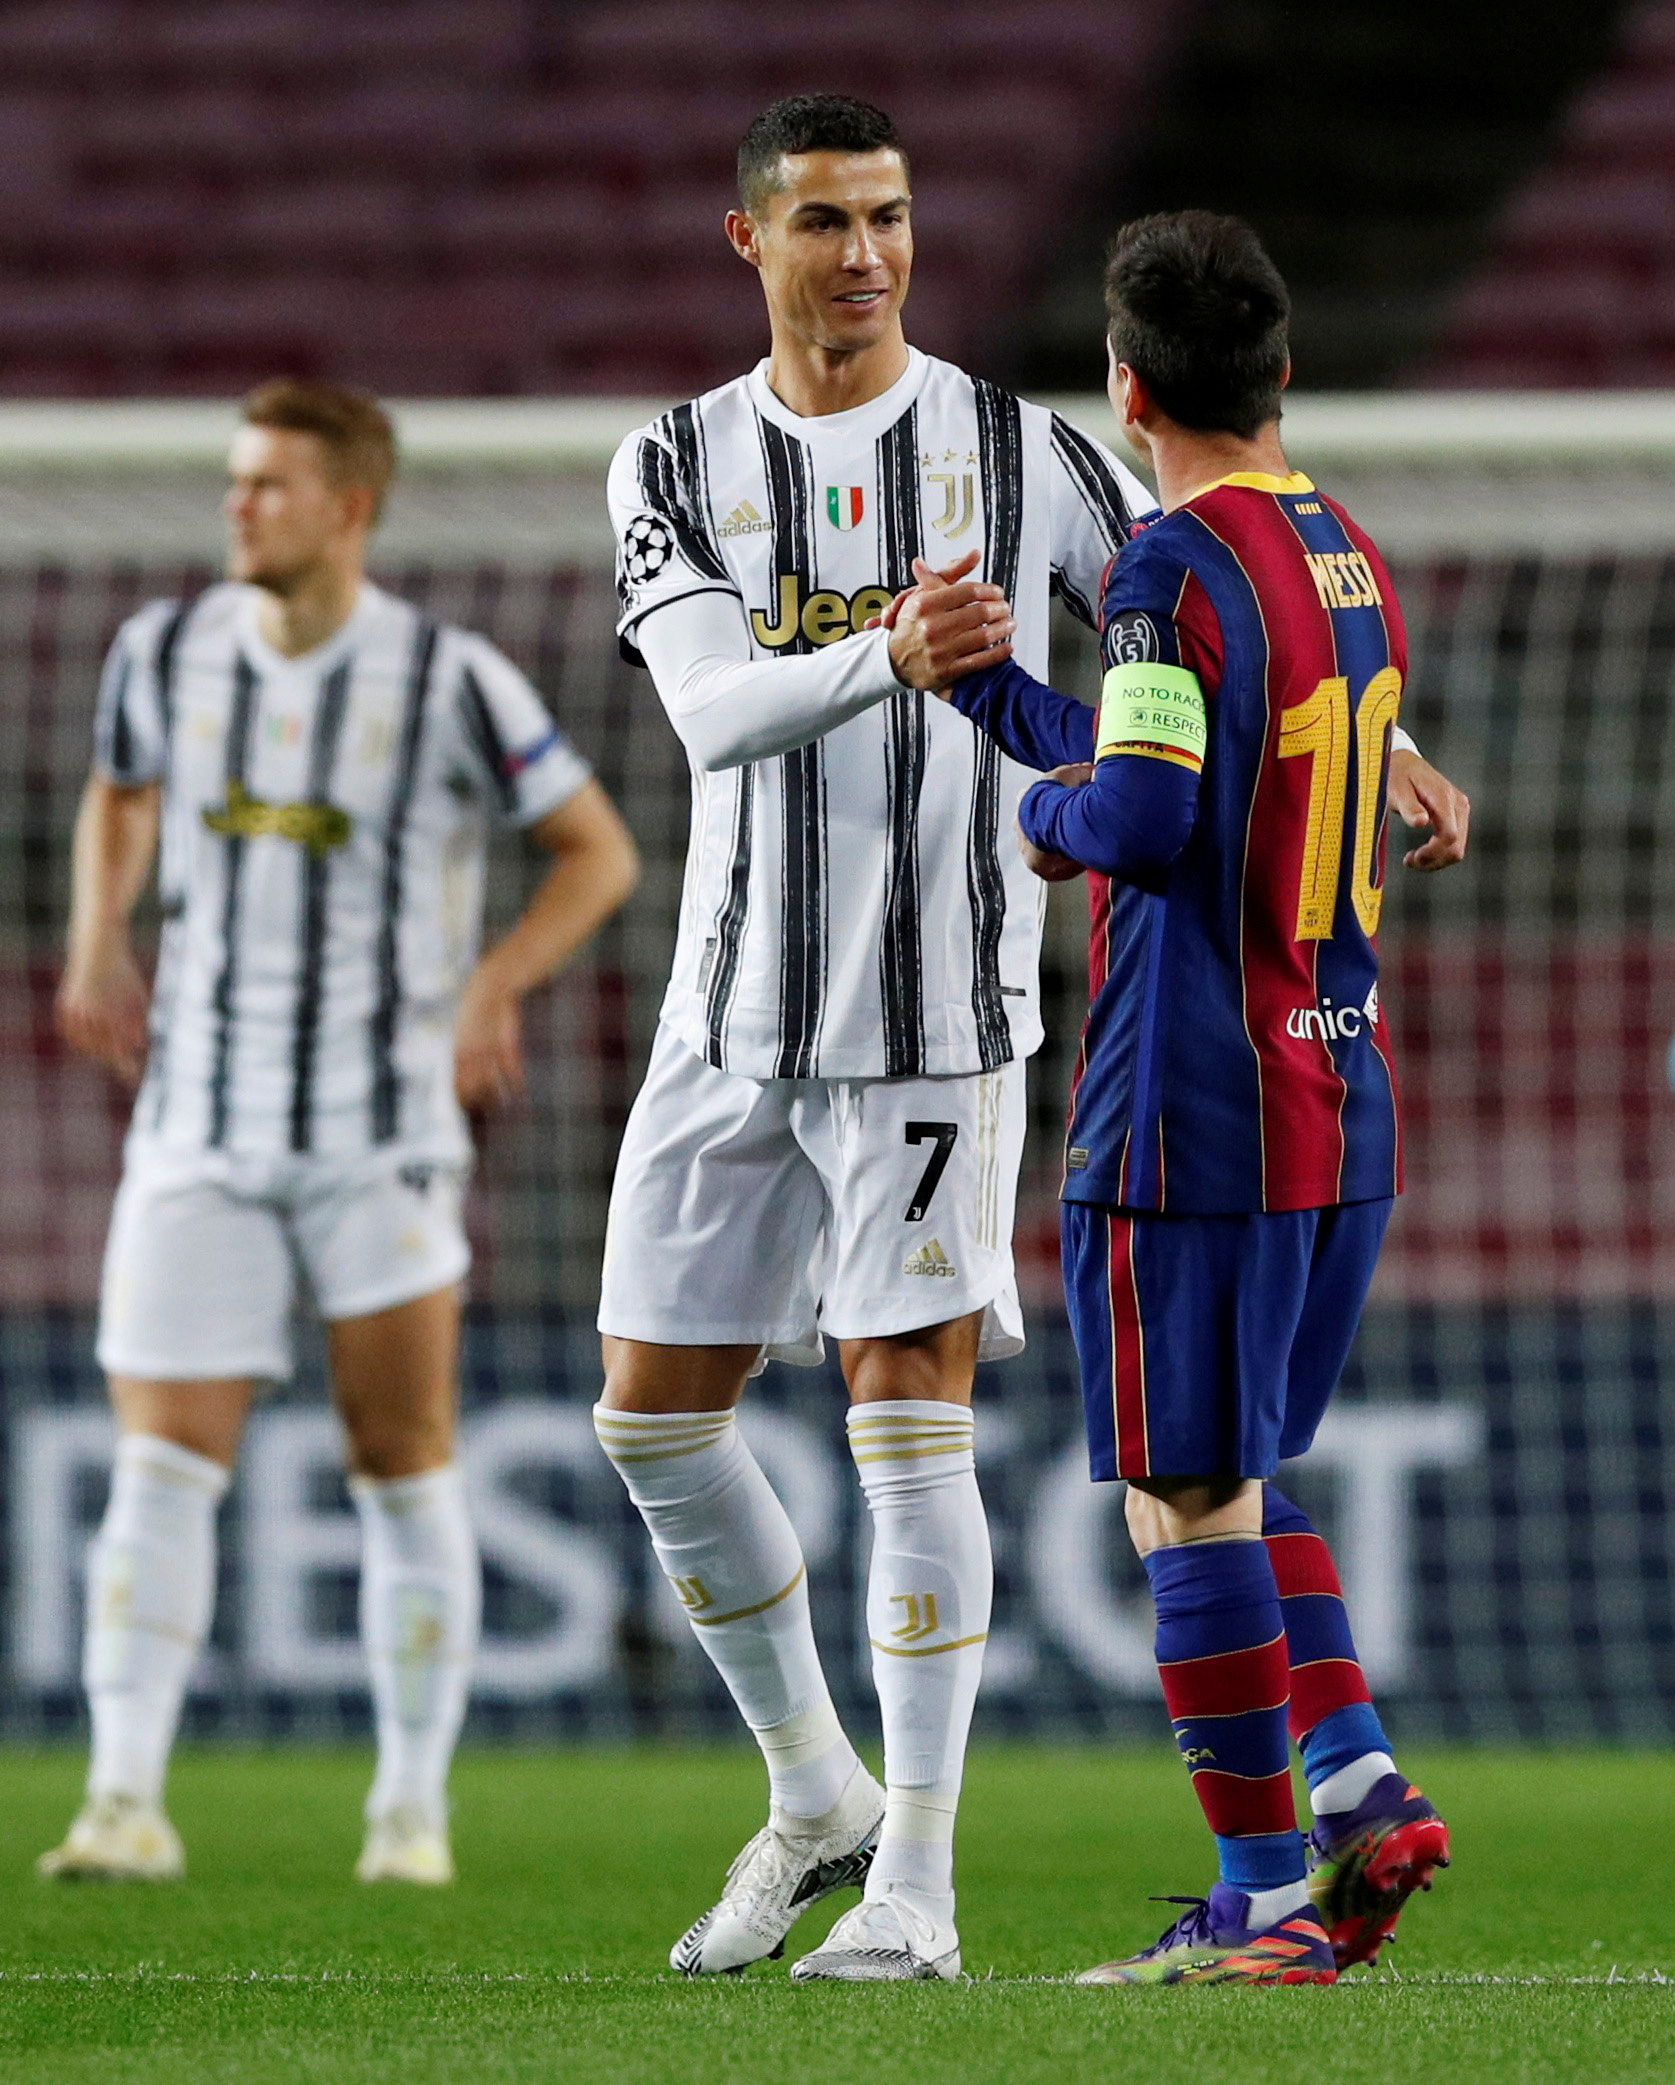 What is the ticket price for the Ronaldo vs Messi match on January